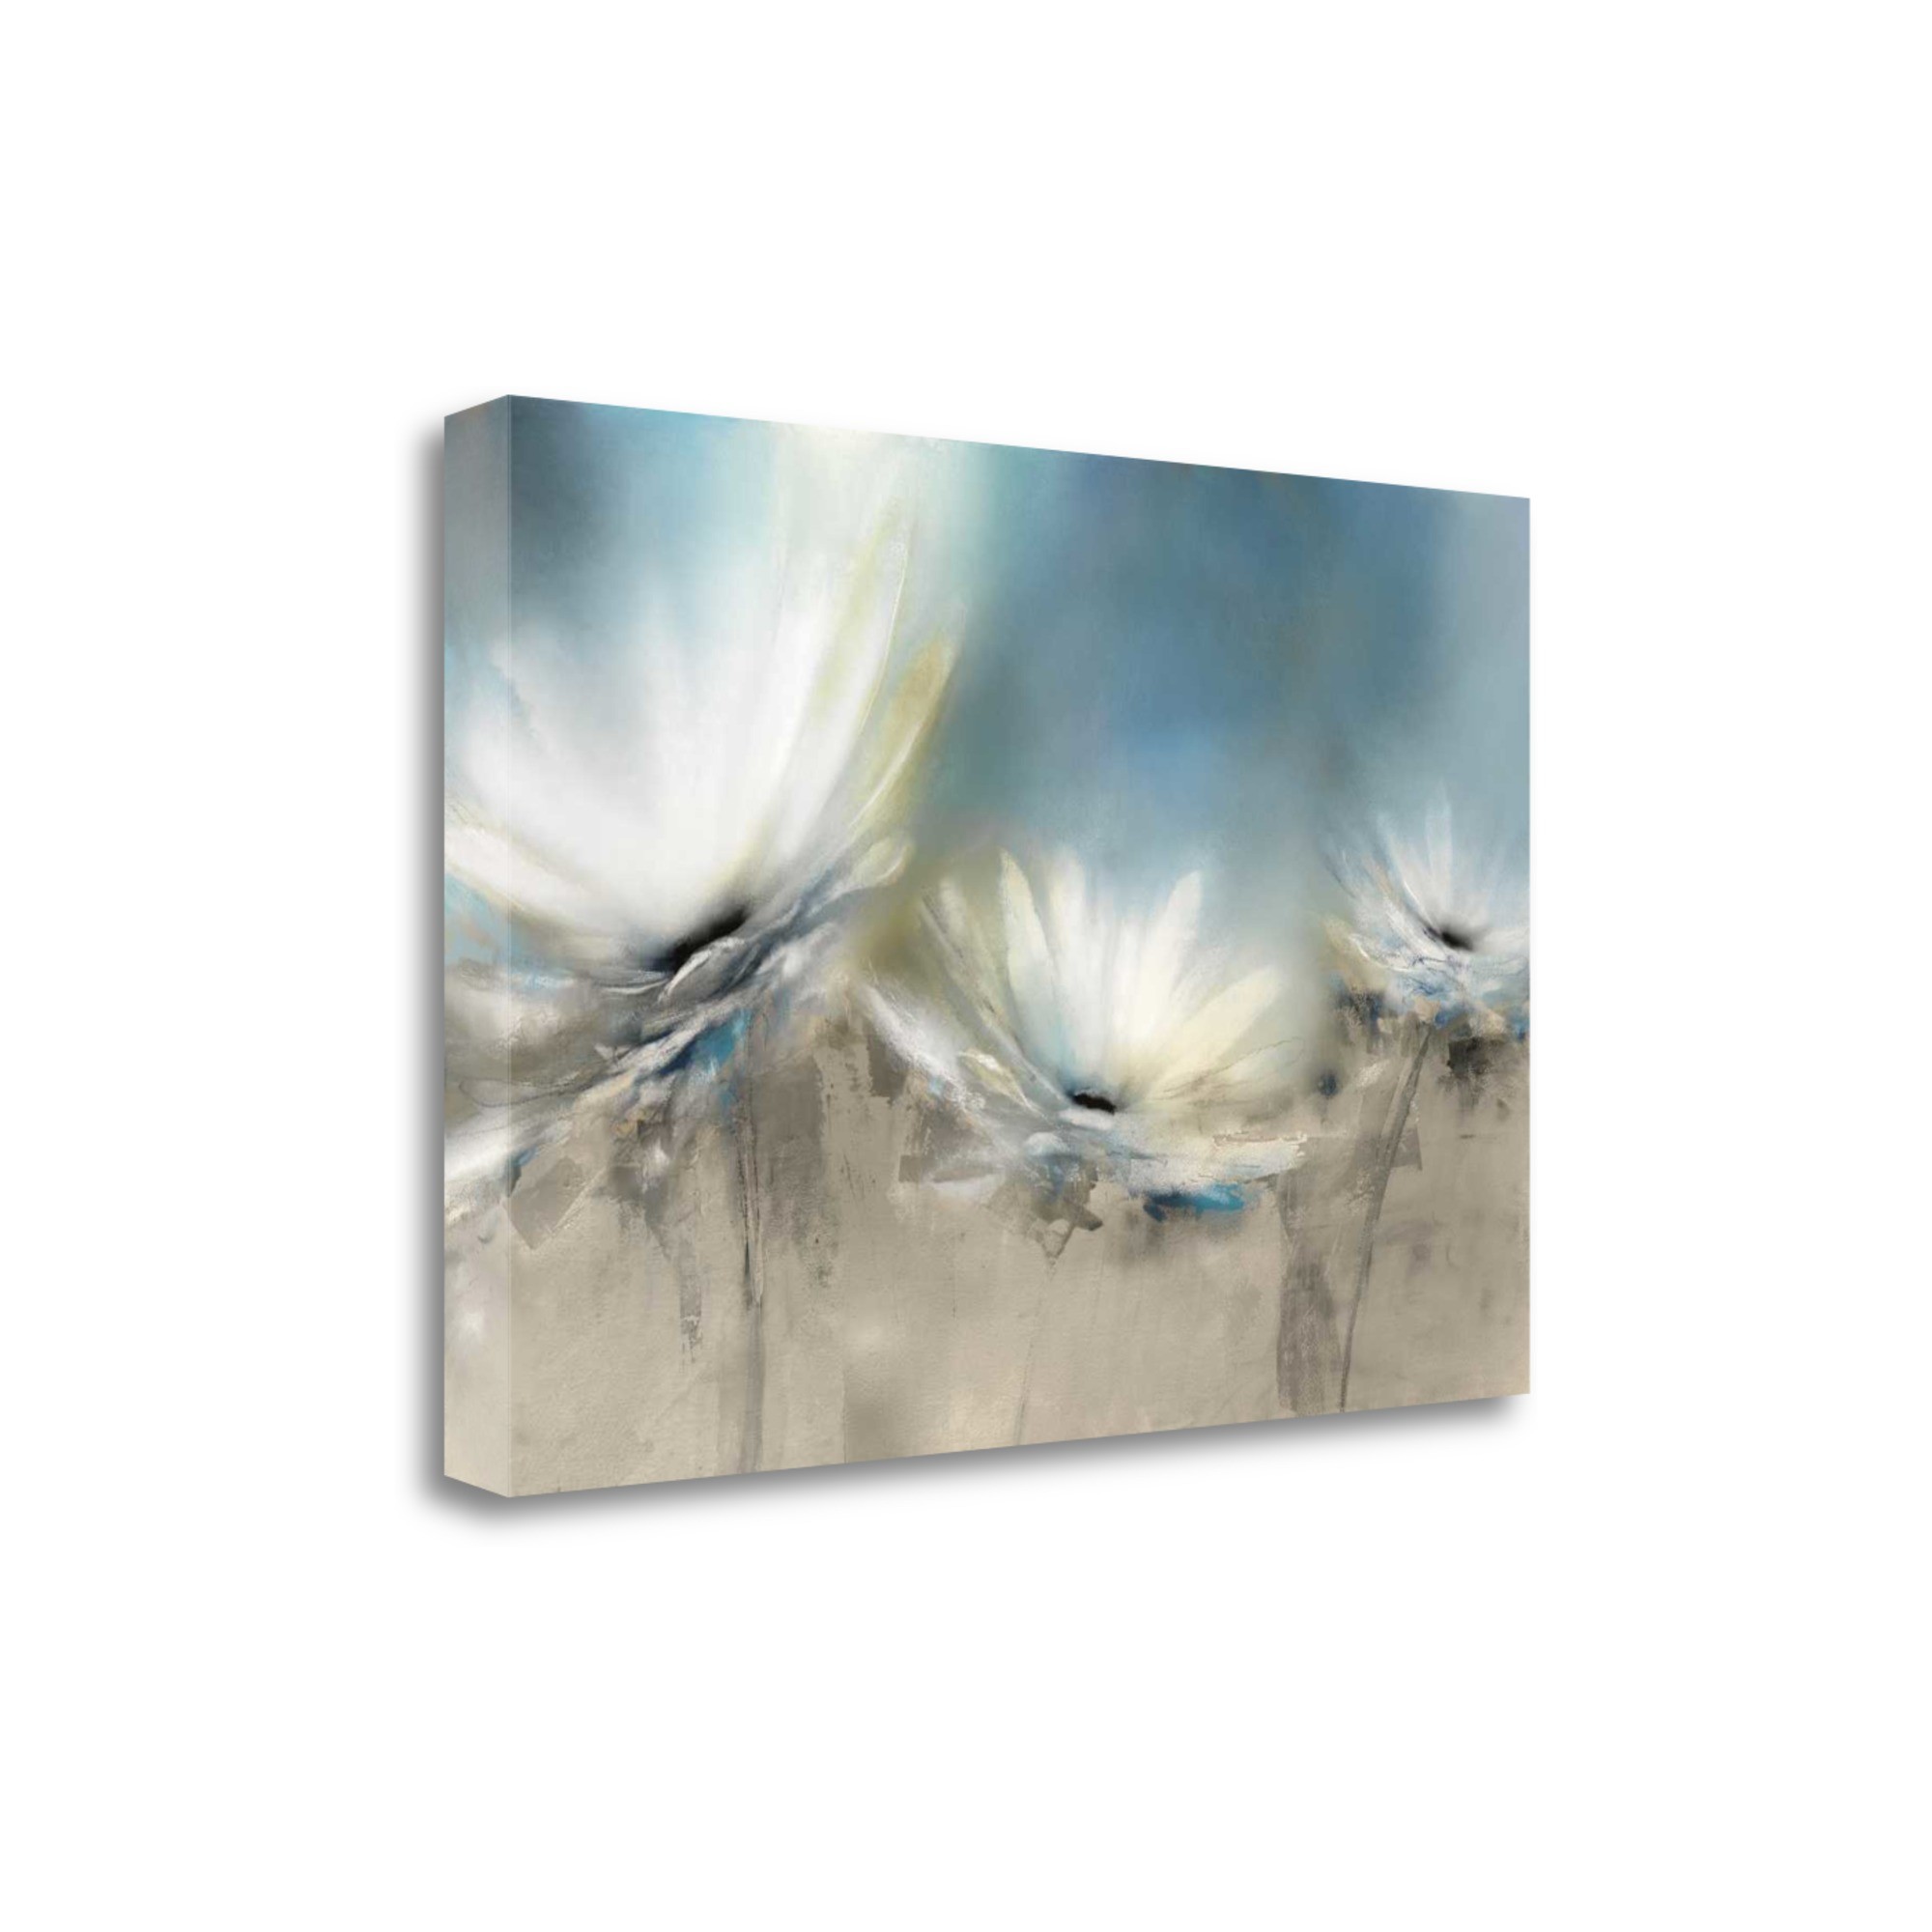 47" Whimsical White Daisies Print on Gallery Wrap Canvas Wall Art